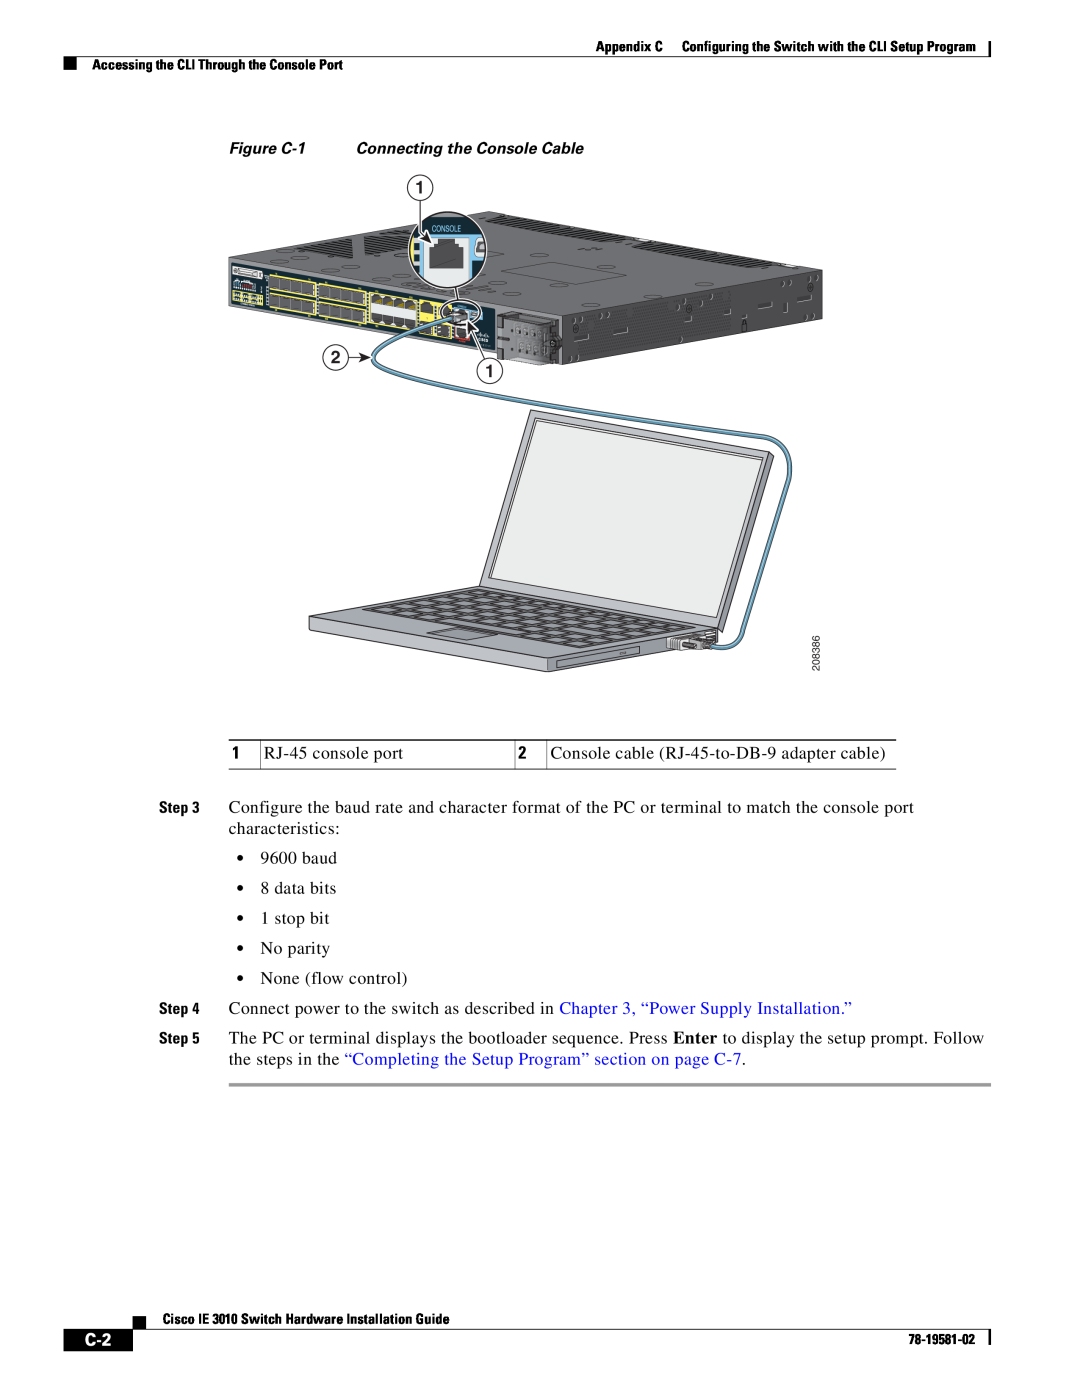 Cisco Systems IE301024TC manual Figure C-1 Connecting the Console Cable 